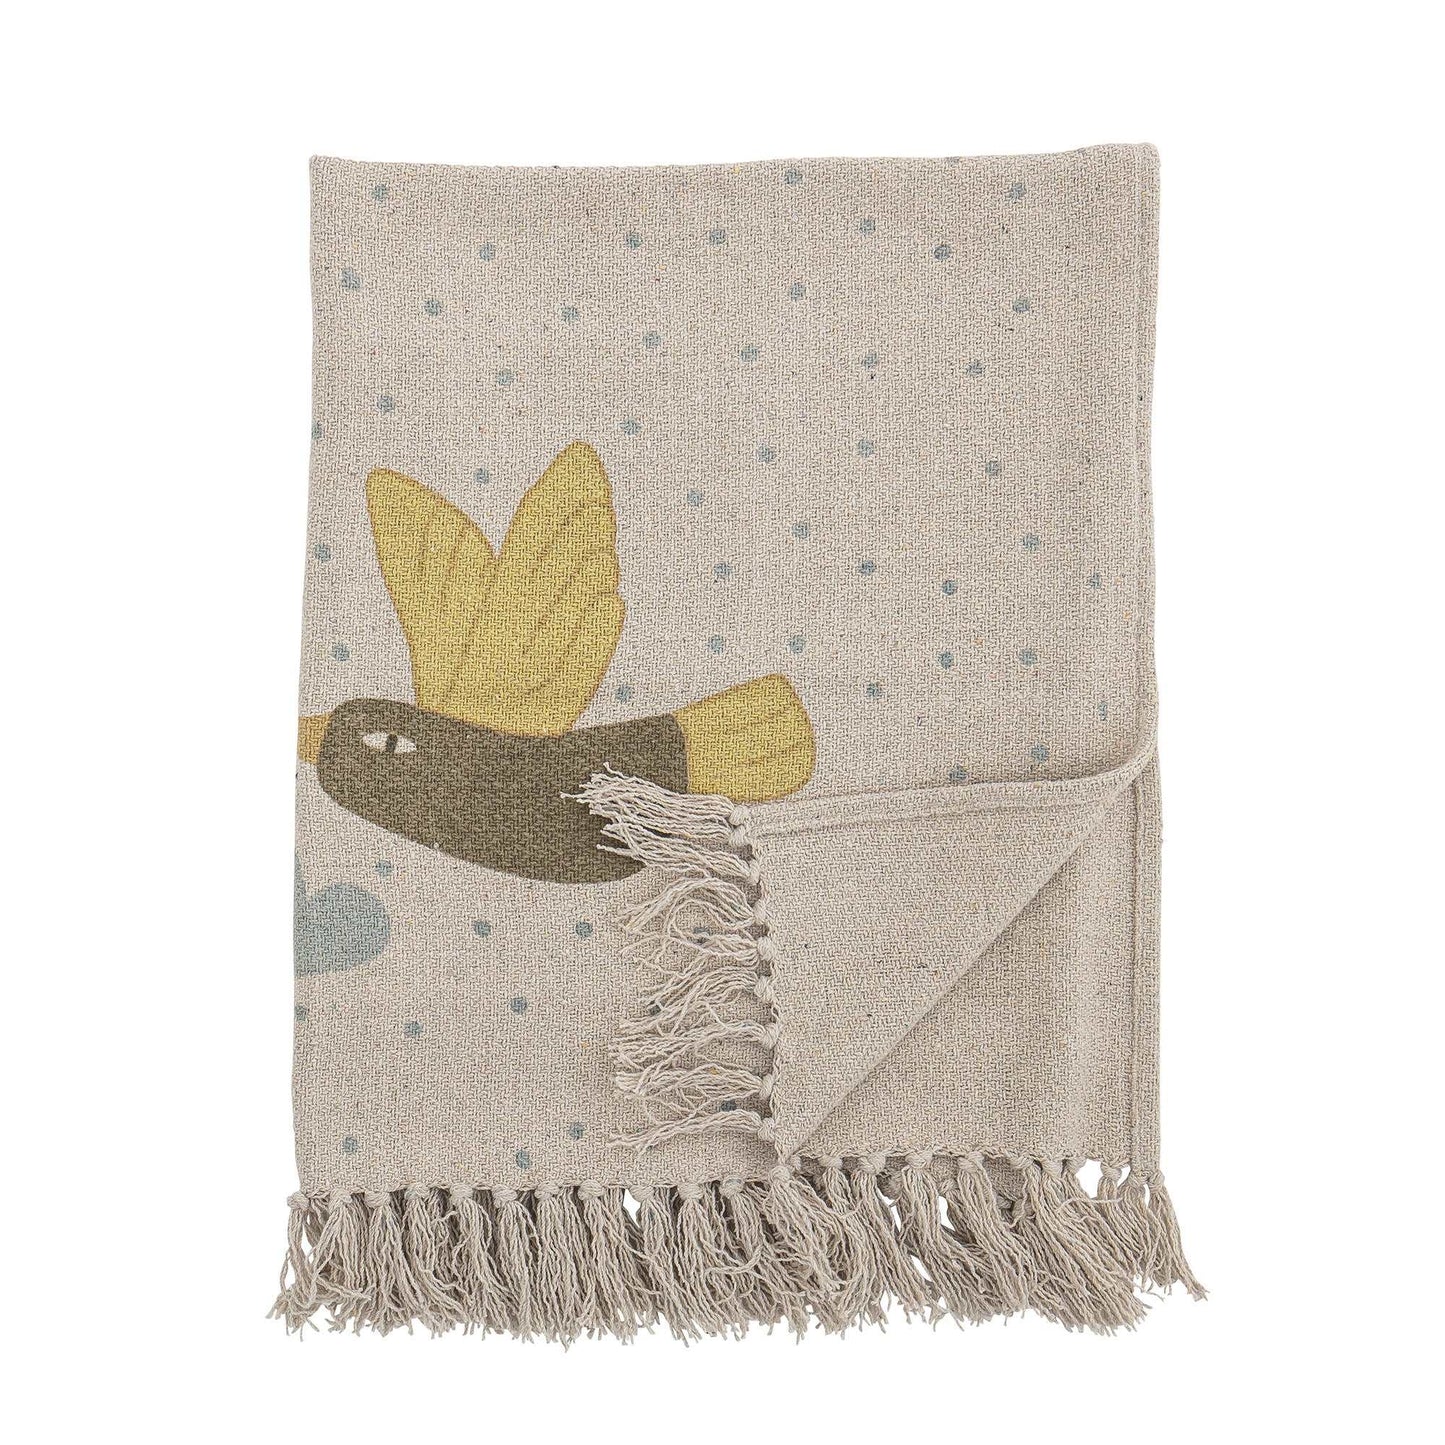 The Alois Throw by Bloomingville MINI has a beautiful and relaxing print with bird pattern. The throw is made of recycled cotton material and has tassels, which gives a modern look. It is a soft, warm and cozy throw that you easily can use in other rooms than the children's room. Dimensions: L100cm xH80cm Material : recycled Cotton